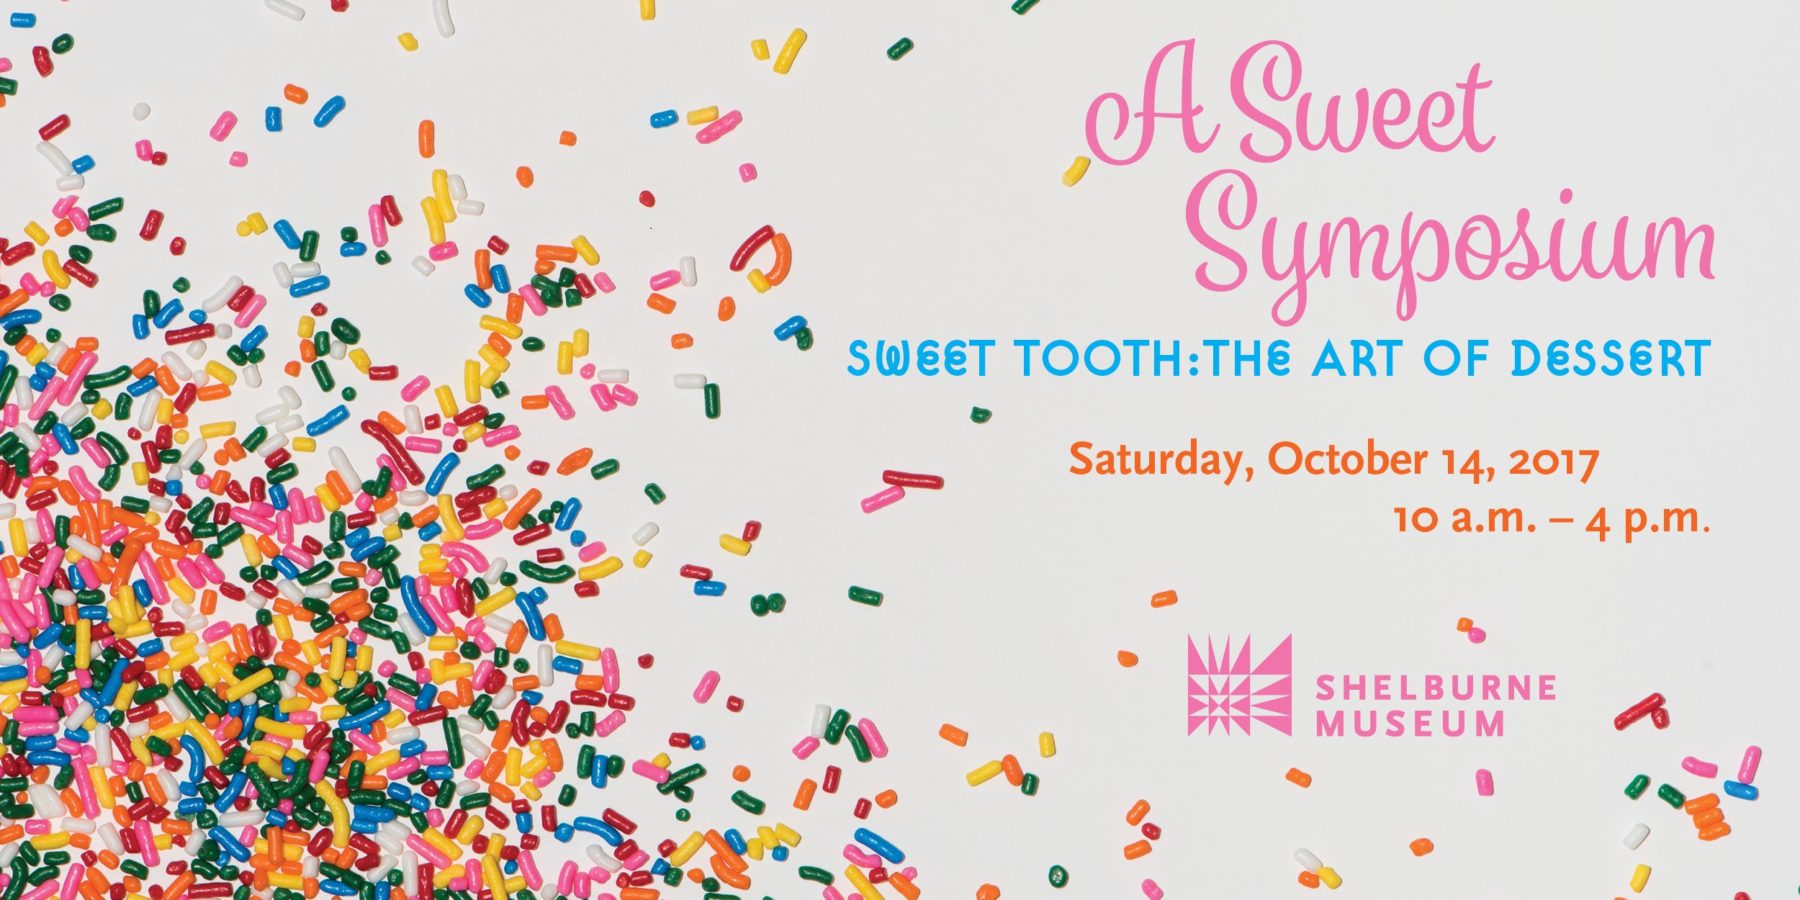 A “Sweet” Symposium exploring Sweet Tooth: The Art of Dessert.